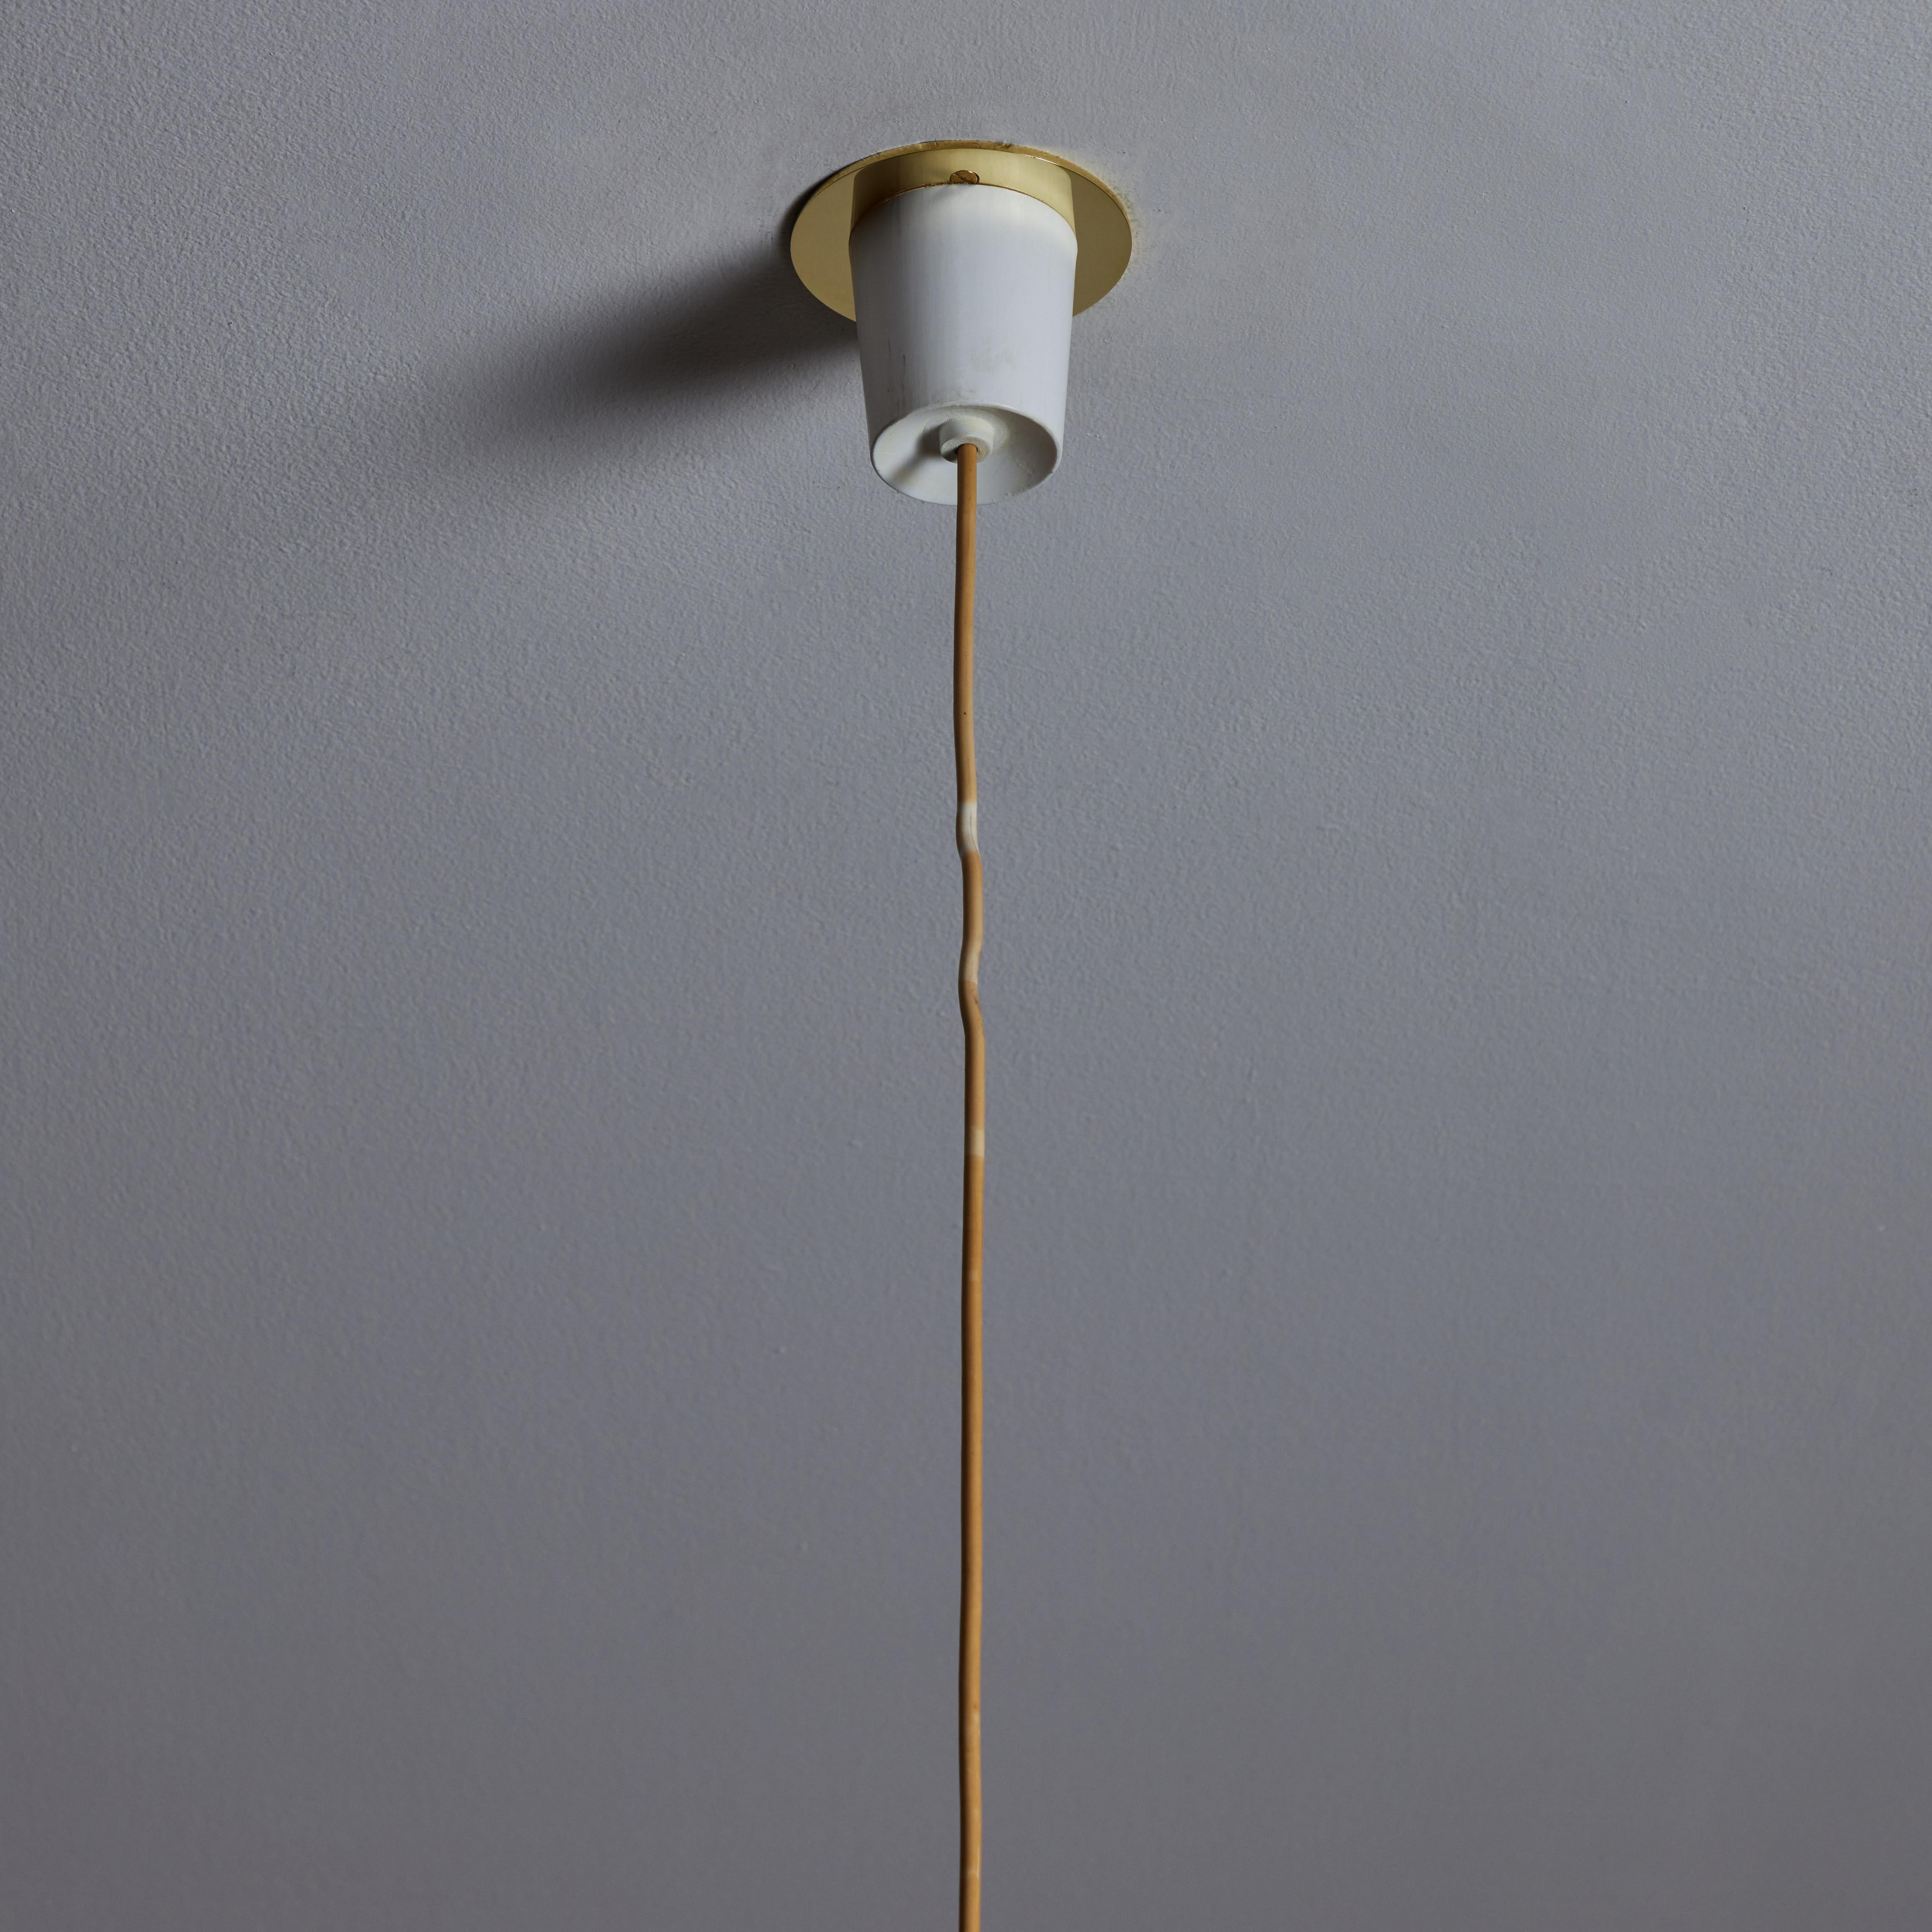 Italian Nuvola Suspension Light by Tobia Scarpa for Flos